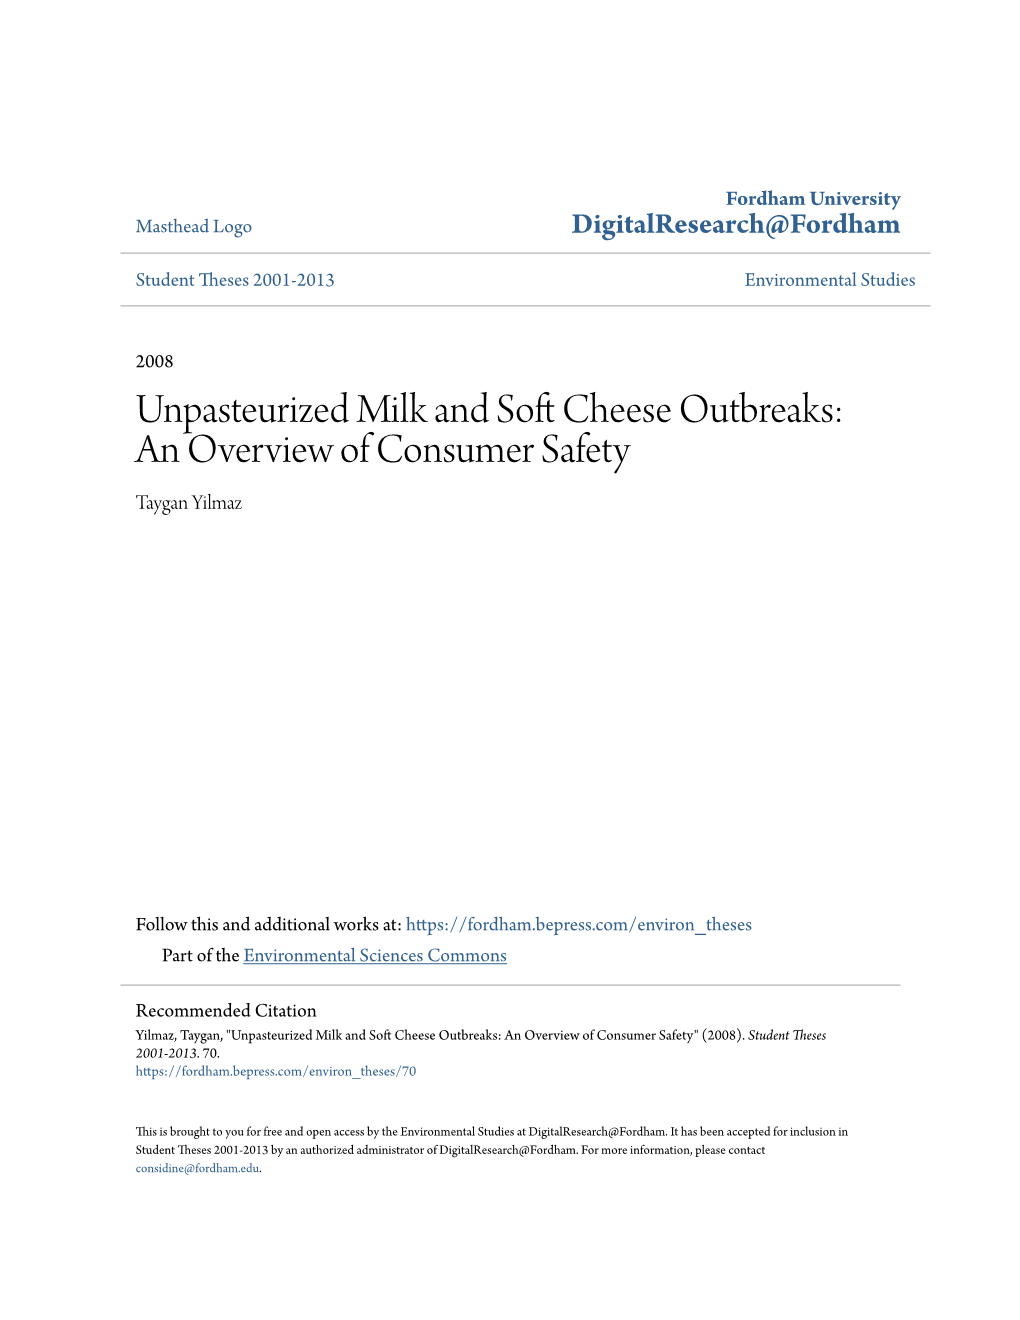 Unpasteurized Milk and Soft Cheese Outbreaks: an Overview of Consumer Safety